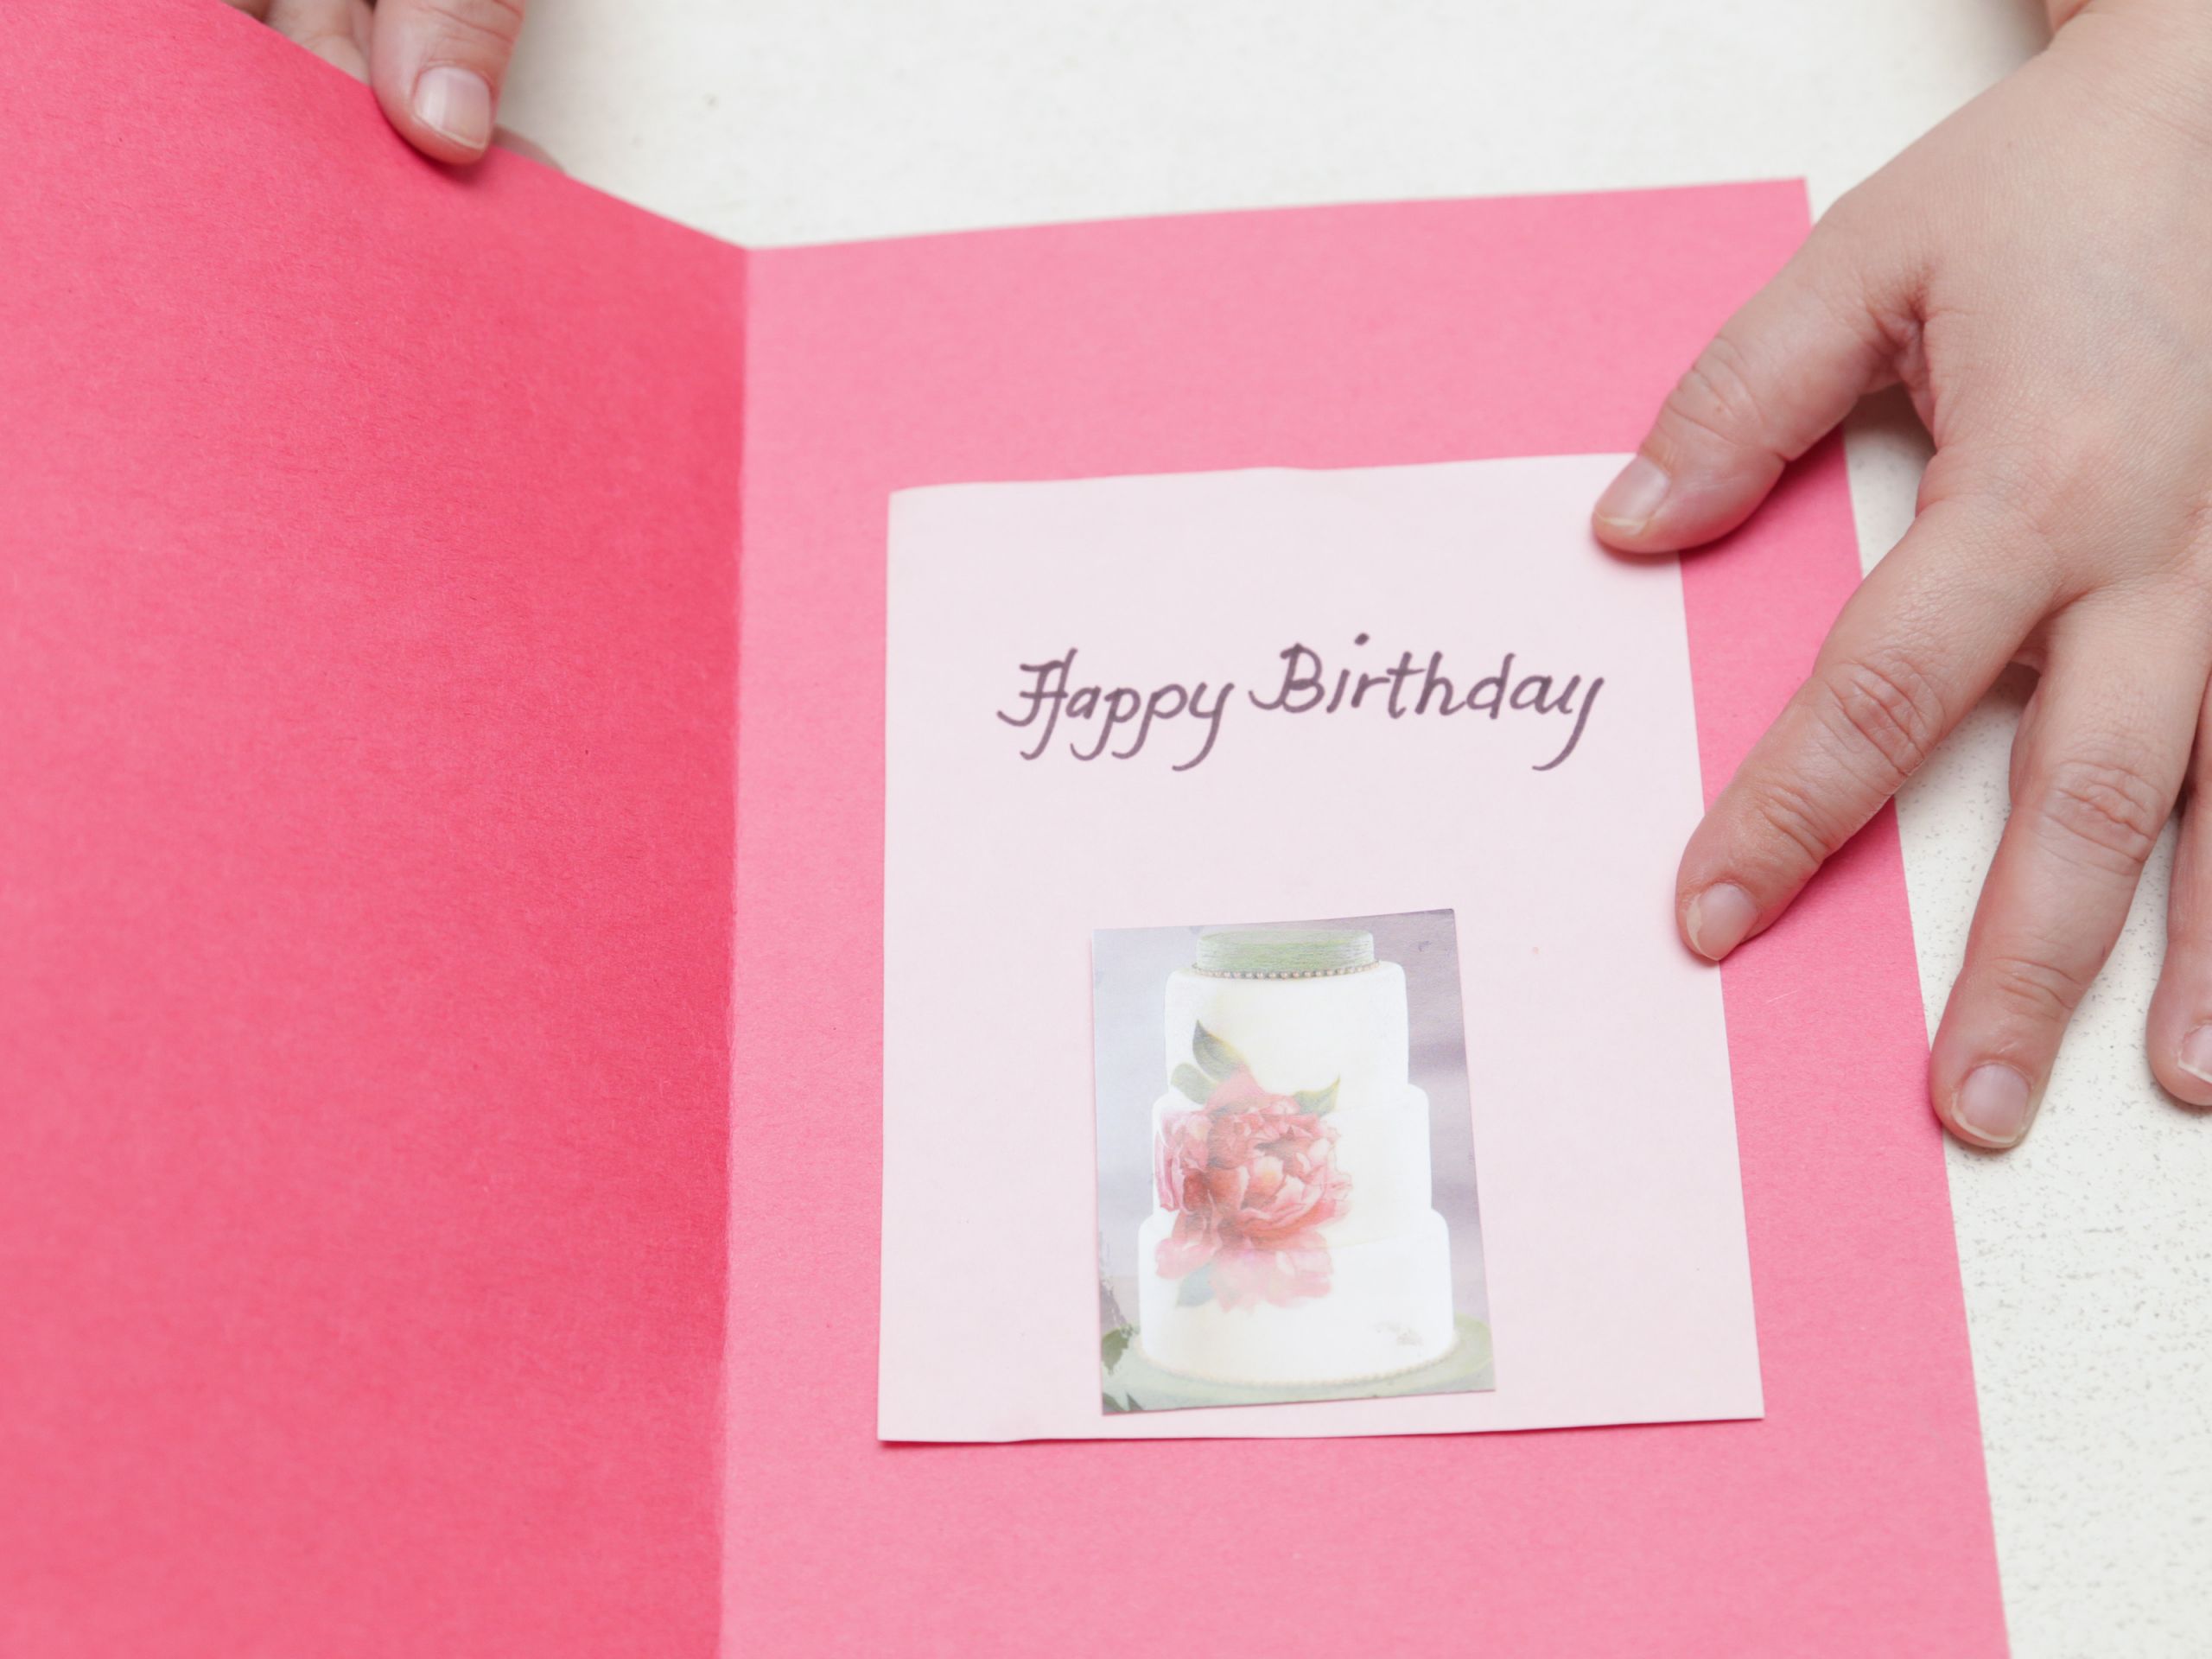 Make Birthday Cards
 4 Ways to Make a Simple Birthday Card at Home wikiHow